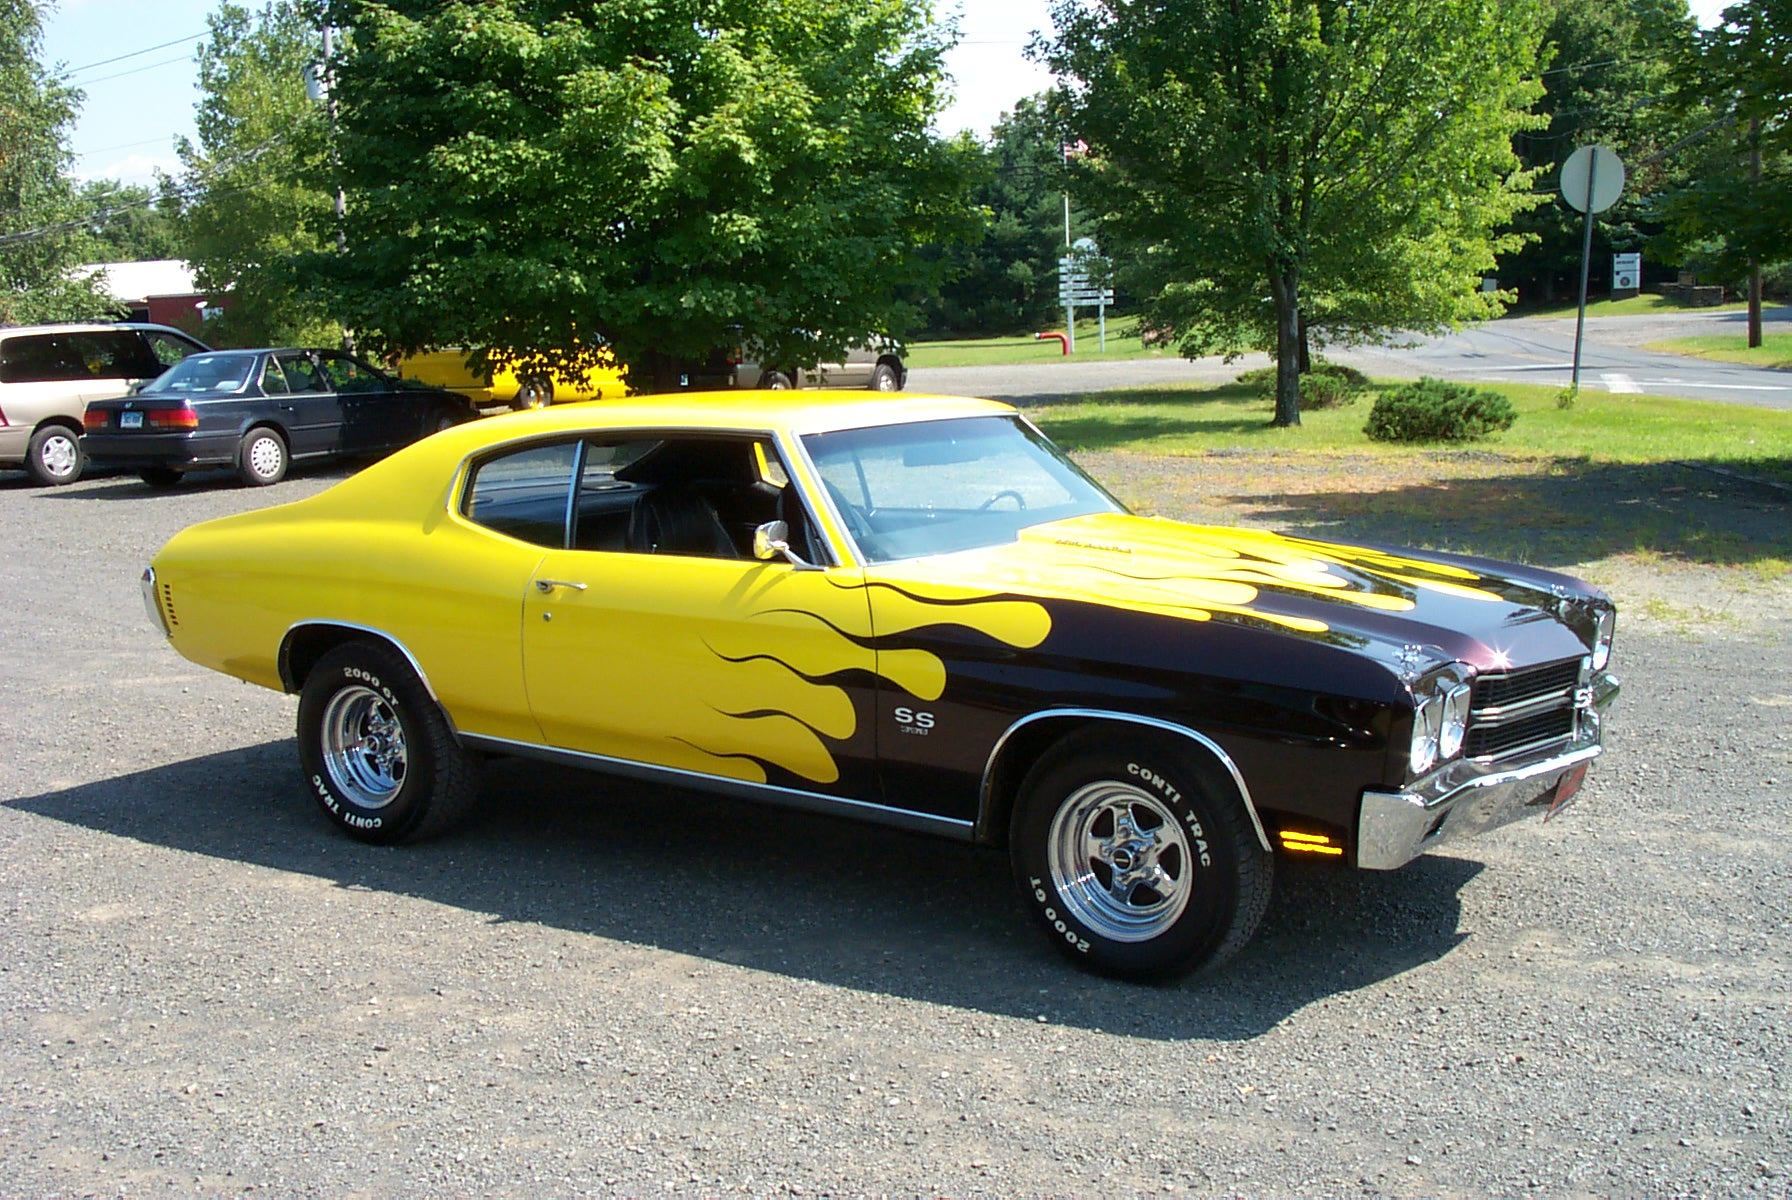 Muscle Cars Wallpapers on Cars Muscle Chevrolet Chevelle Ss Car Hd Wallpaper   Cars   Trucks